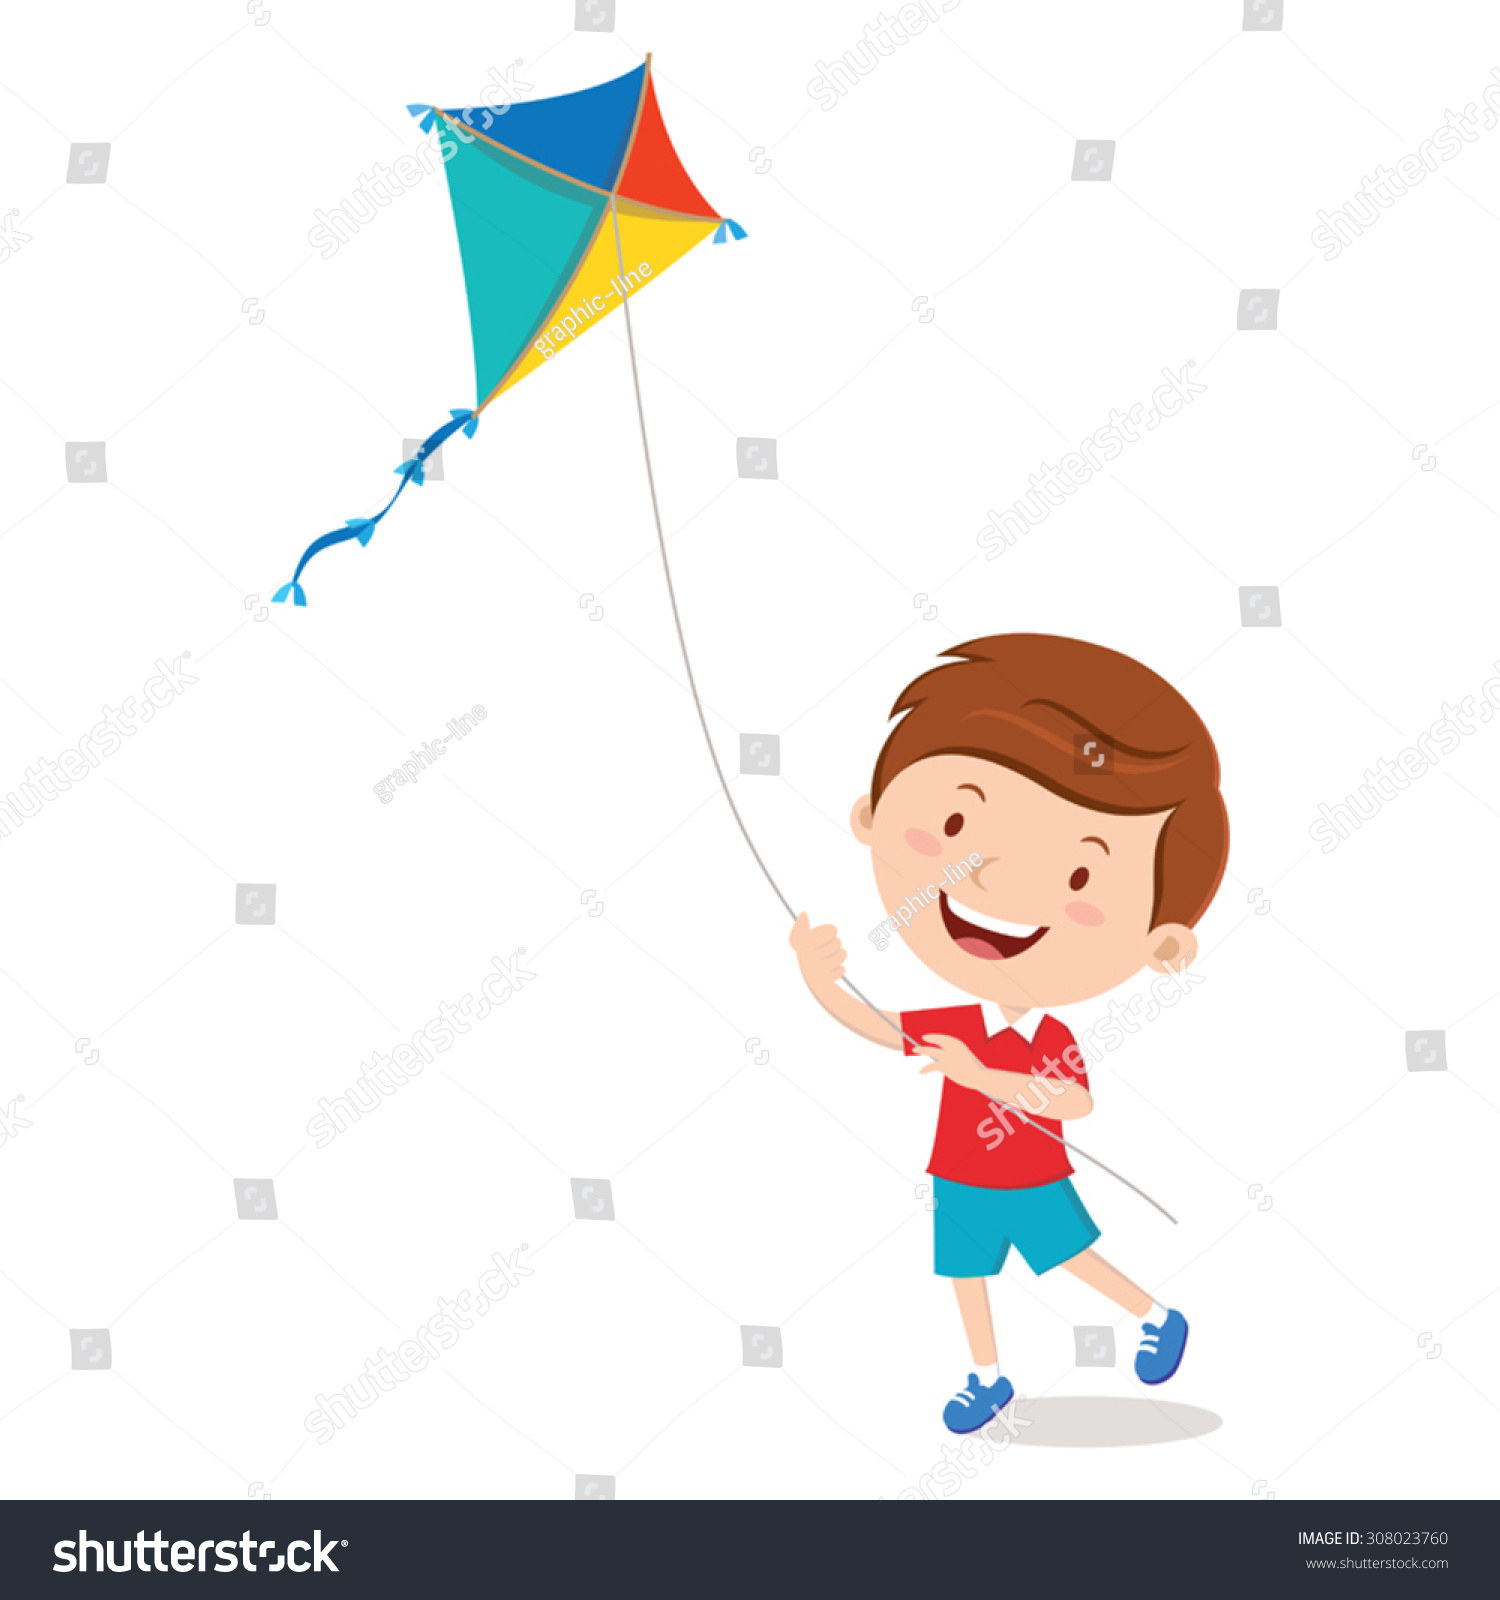 SVG of Boy playing kite. Vector illustration of a cheerful boy flying kite. svg